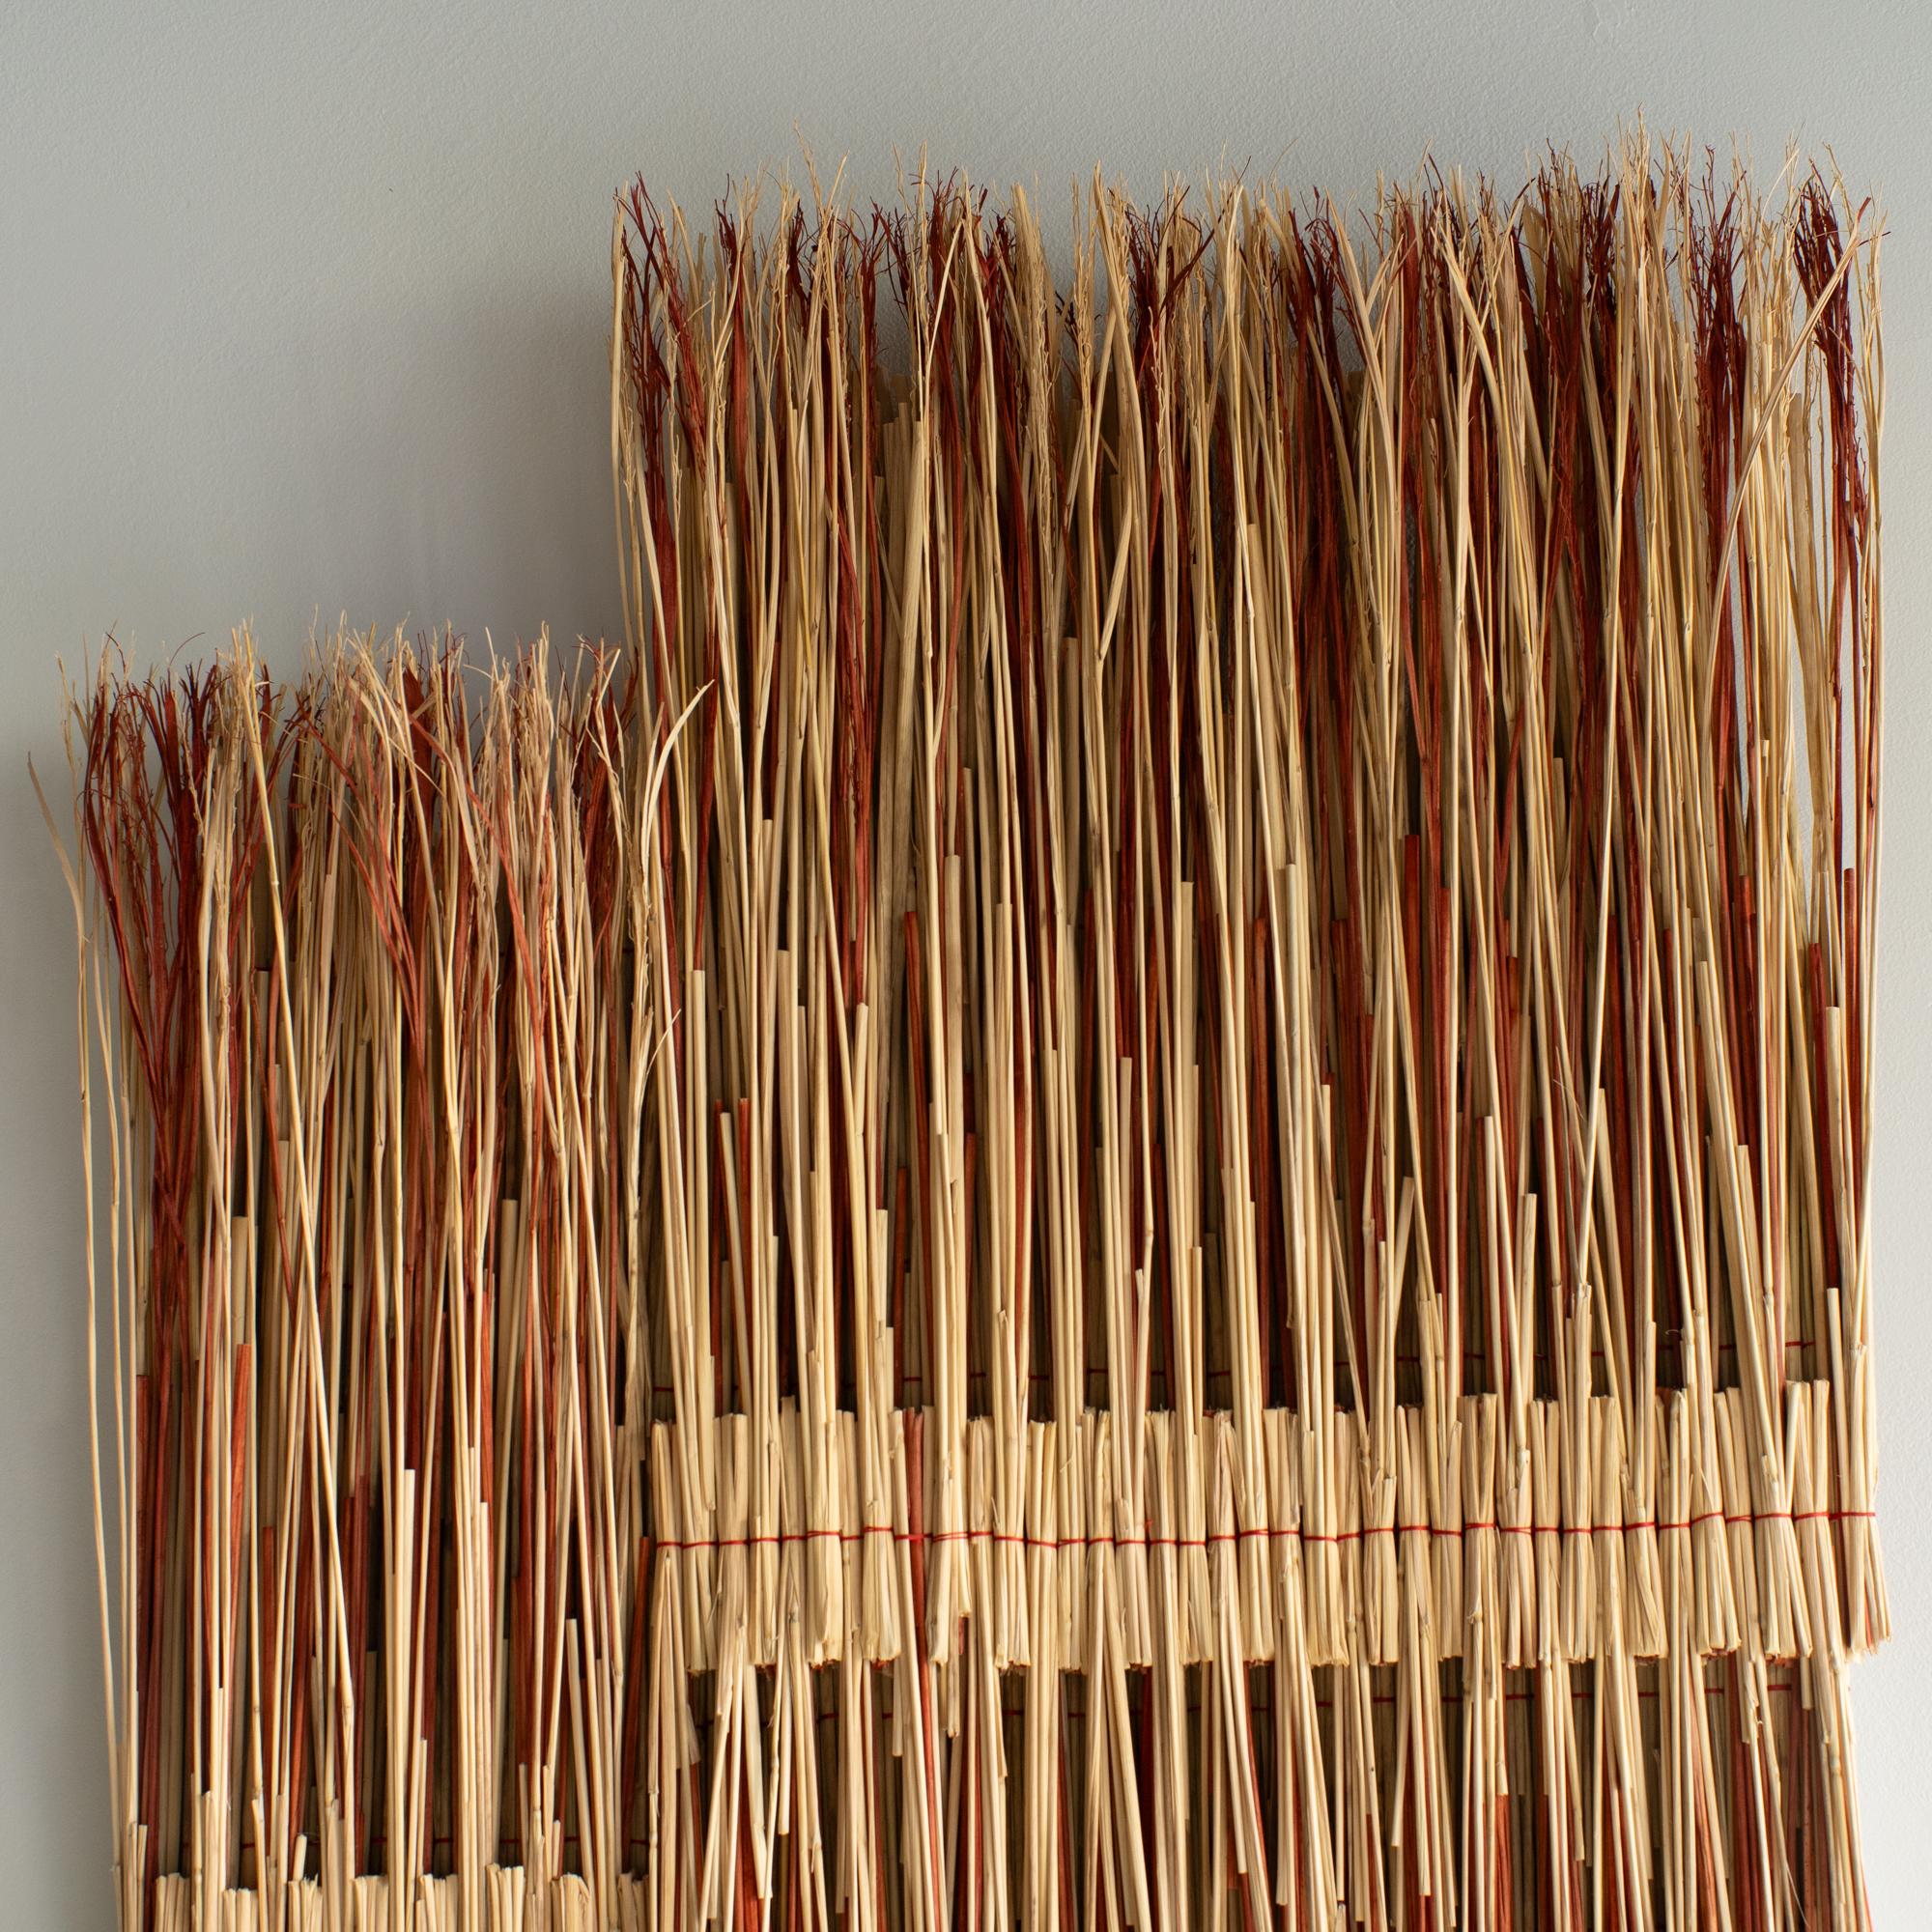 ARKO  Rice Straw Art Wall 20 Sculpture Contemporary Art Japanese Craft In New Condition For Sale In Shibuya-ku, Tokyo